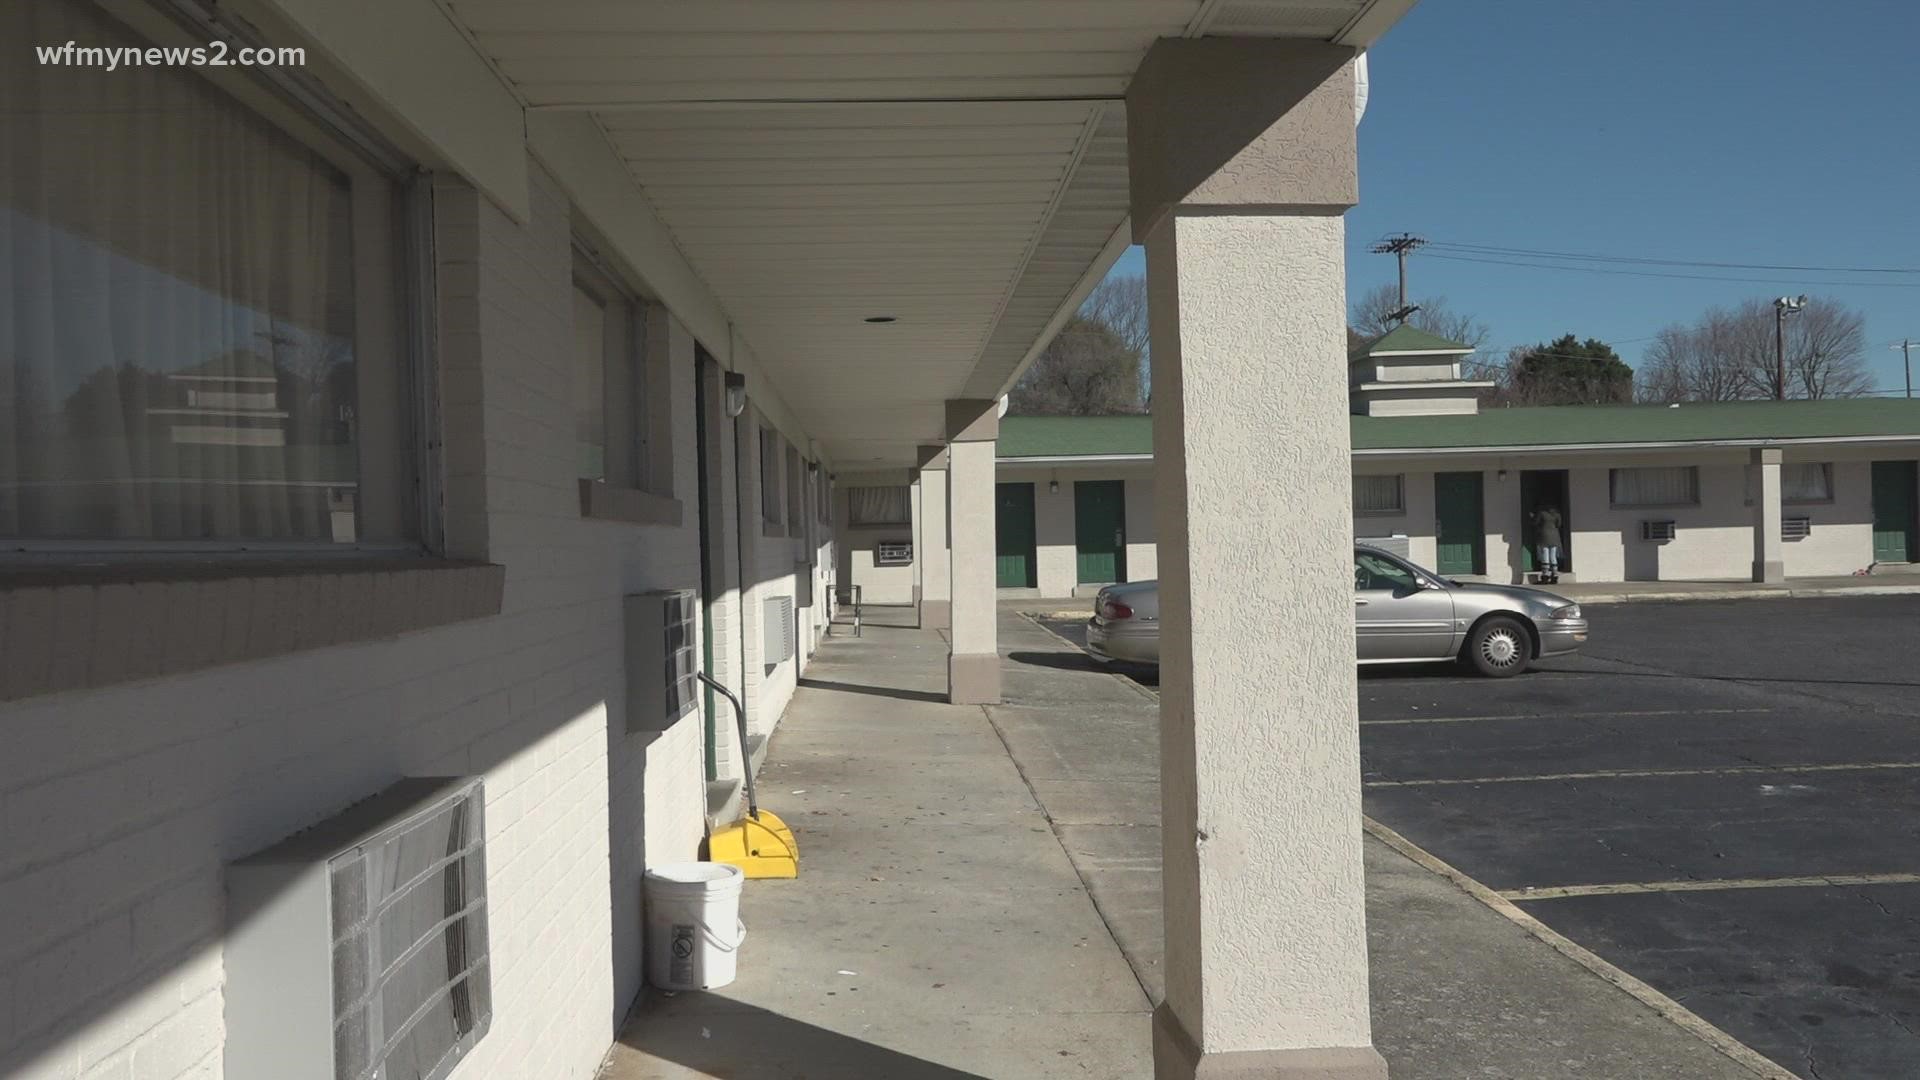 A Greensboro non-profit organization recently purchased a former hotel to serve as a homeless shelter for the winter.